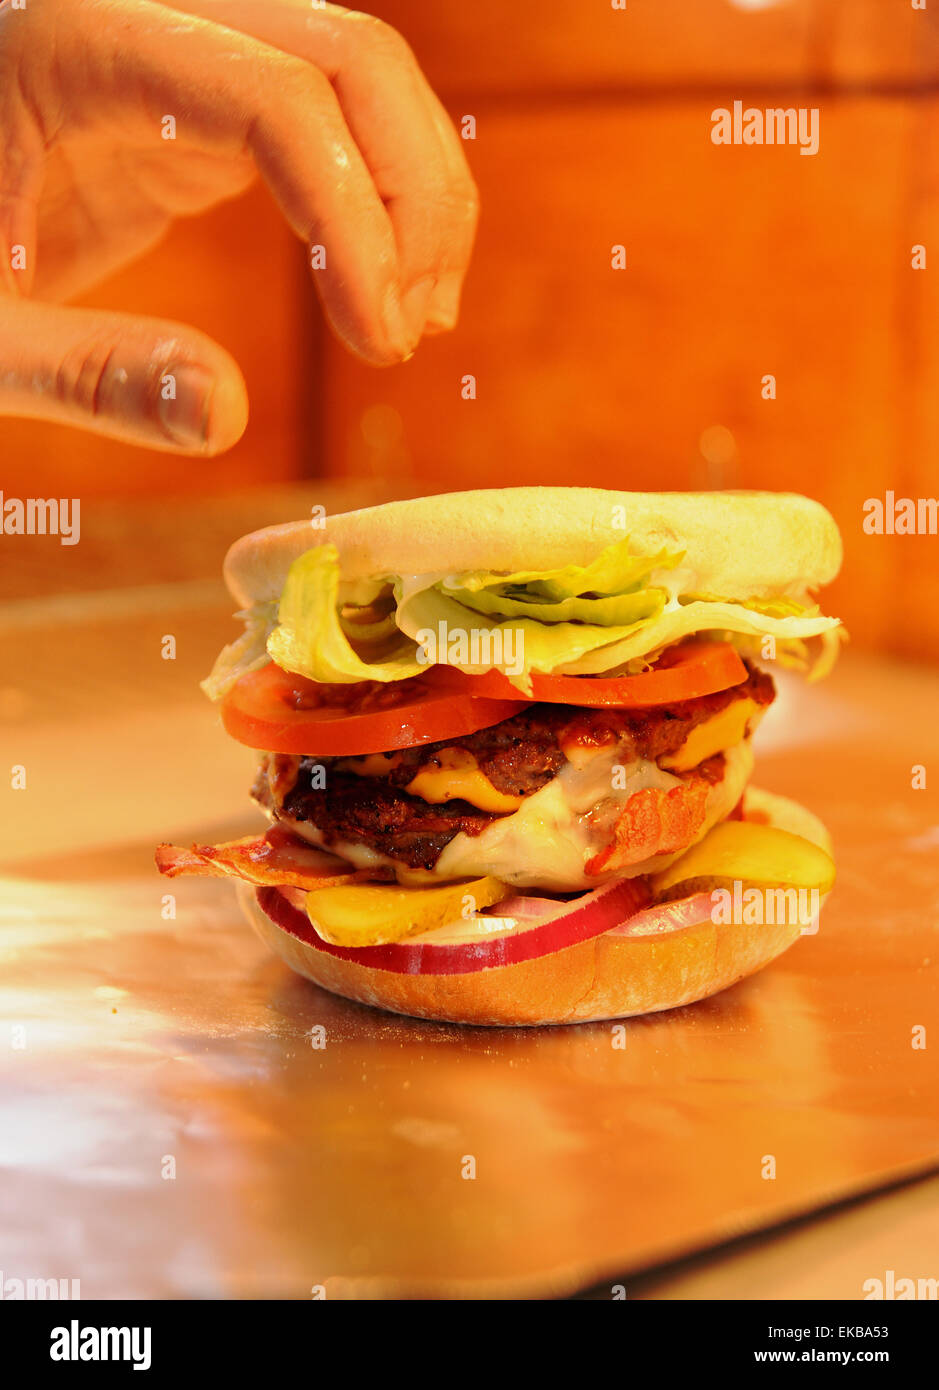 Burger in a bun with cheese and bacon in the hot service area of take away fast food shop Stock Photo